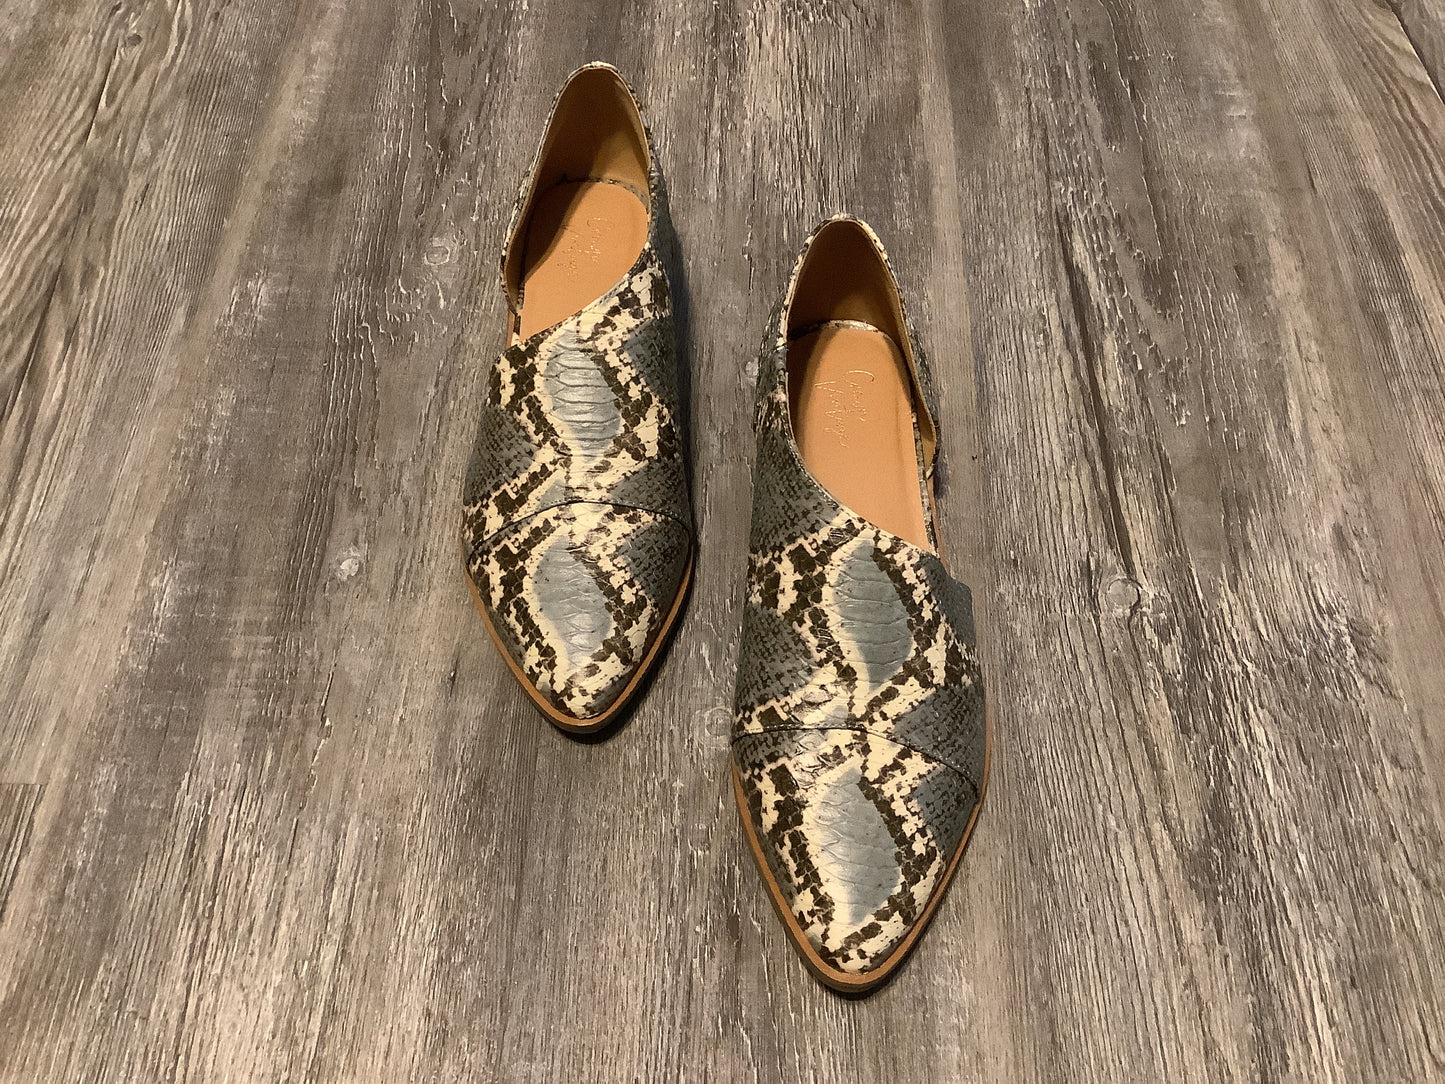 Shoes Flats By Crown Vintage  Size: 9.5